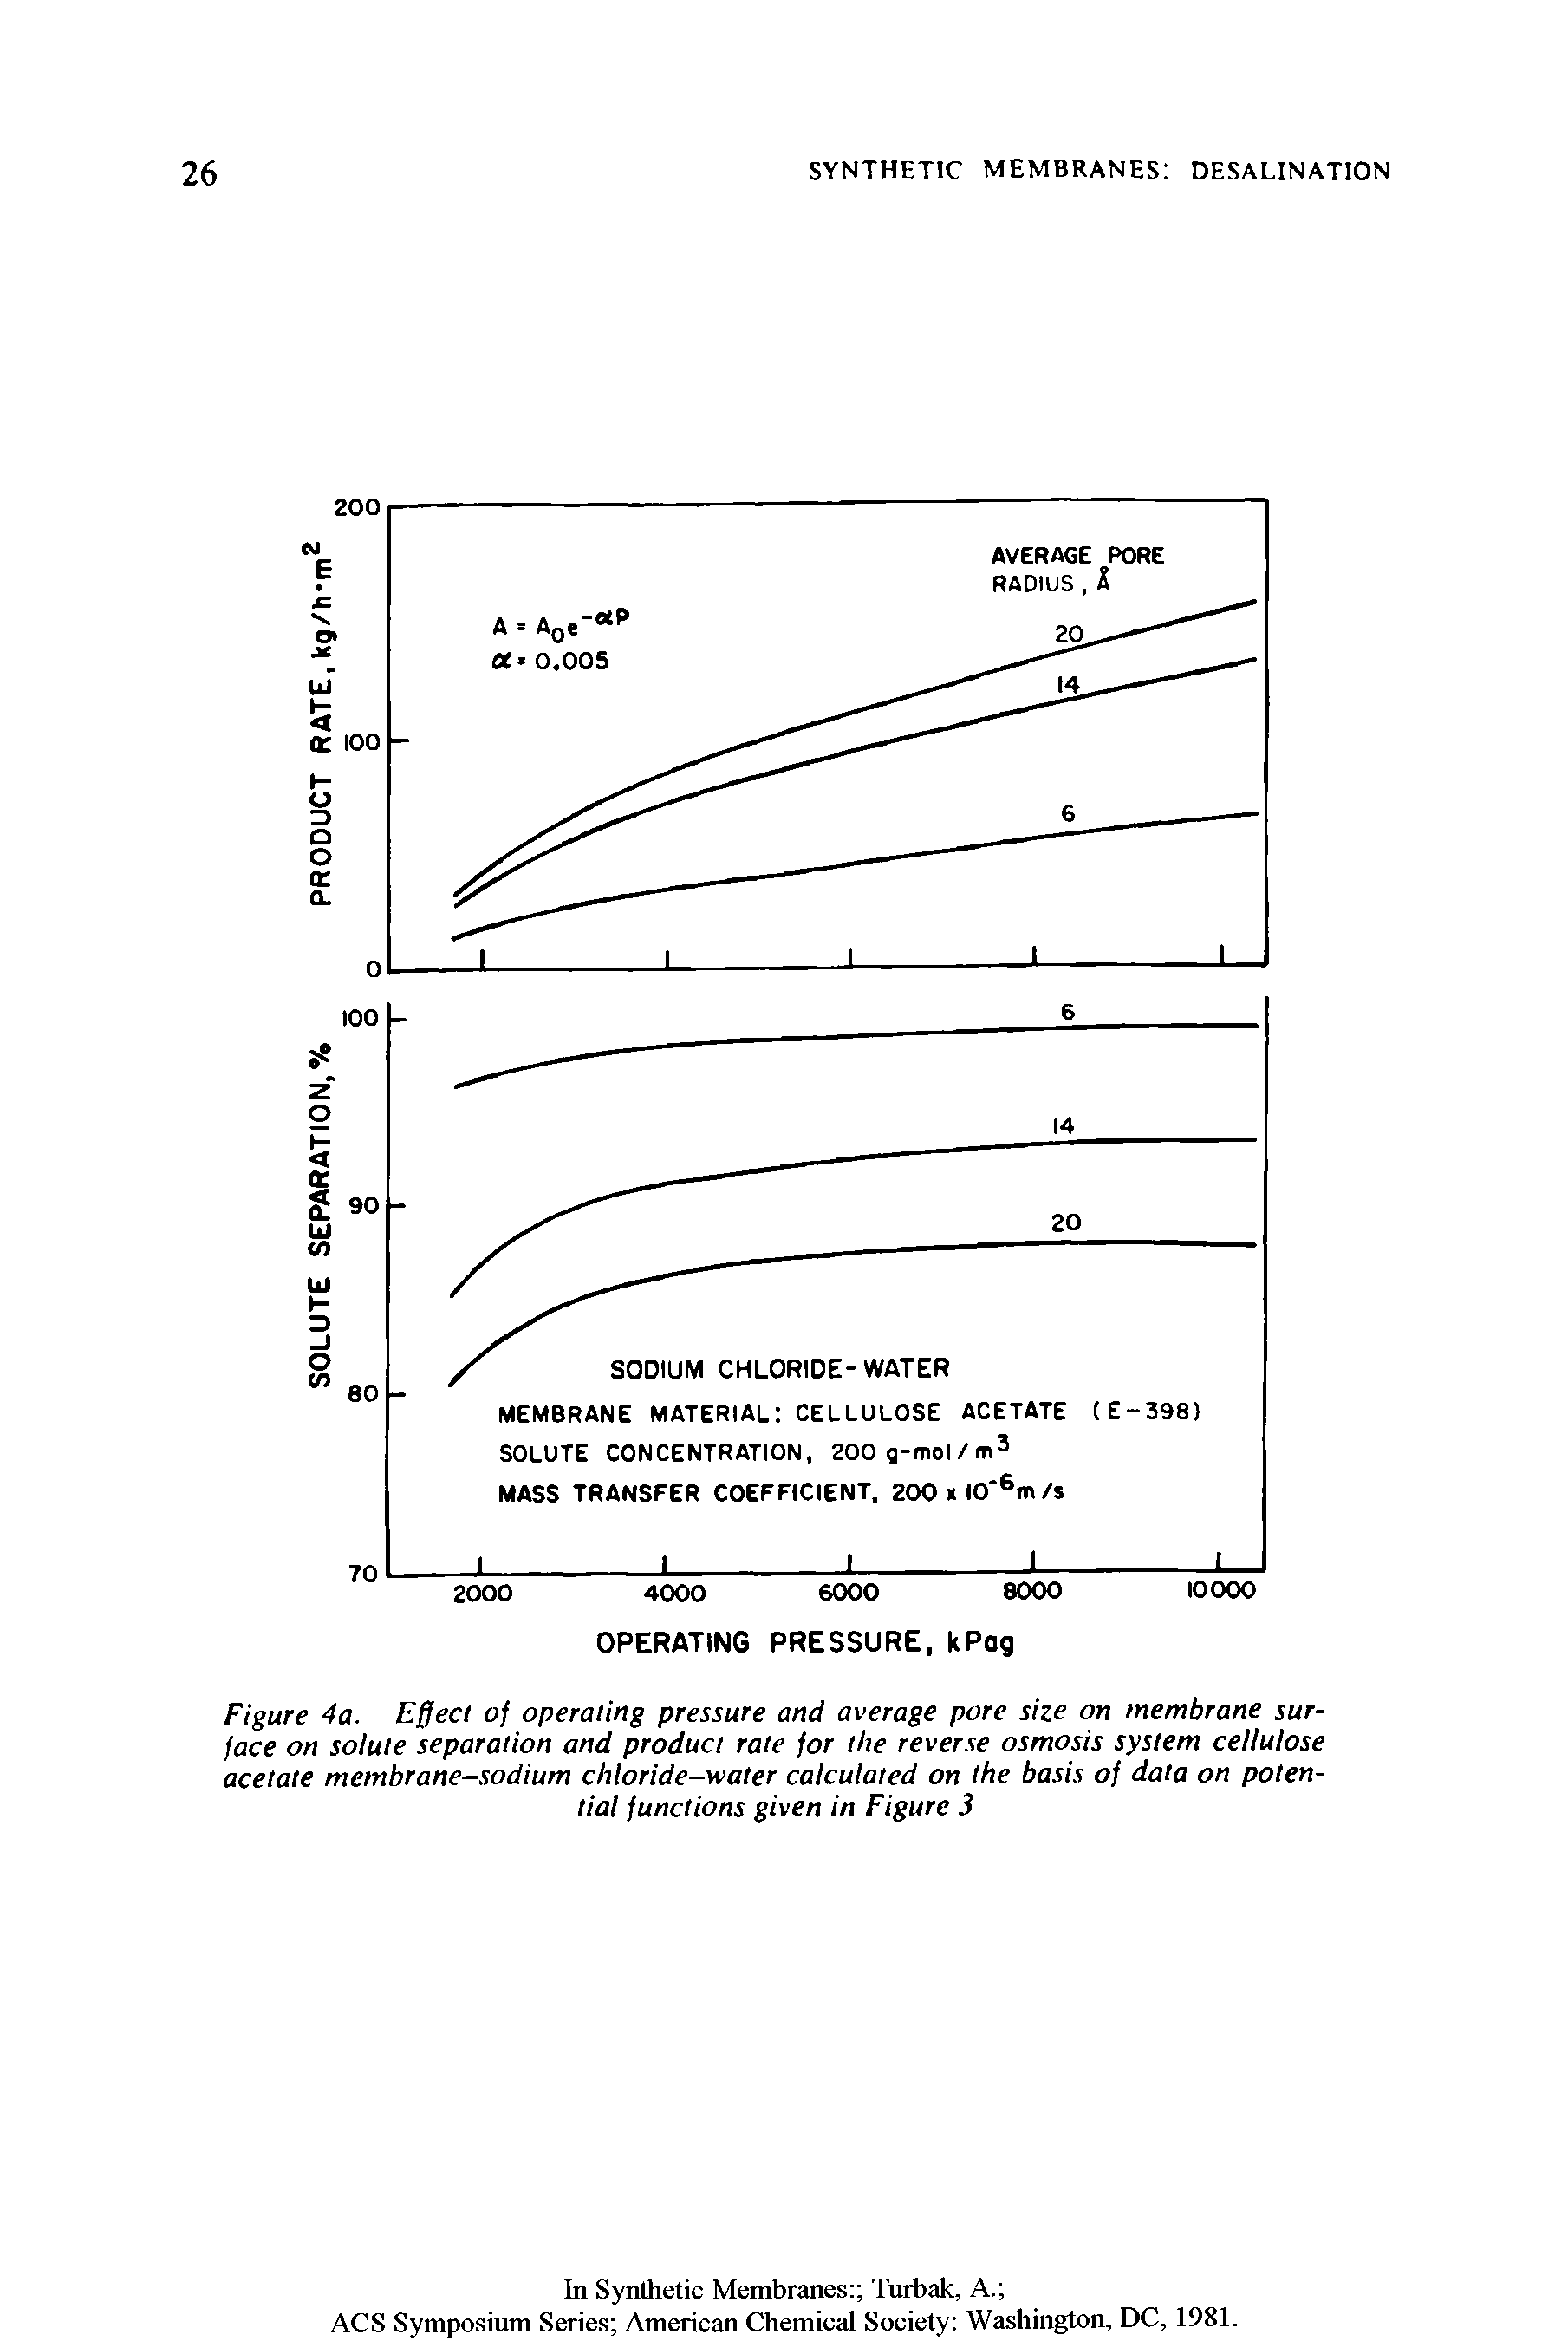 Figure 4a. Effecl of operating pressure and average pore size on membrane surface on solute separation and product rate for the reverse osmosis system cellulose acetate membrane-sodium chloride-water calculated on the basis of data on potential functions given in Figure 3...